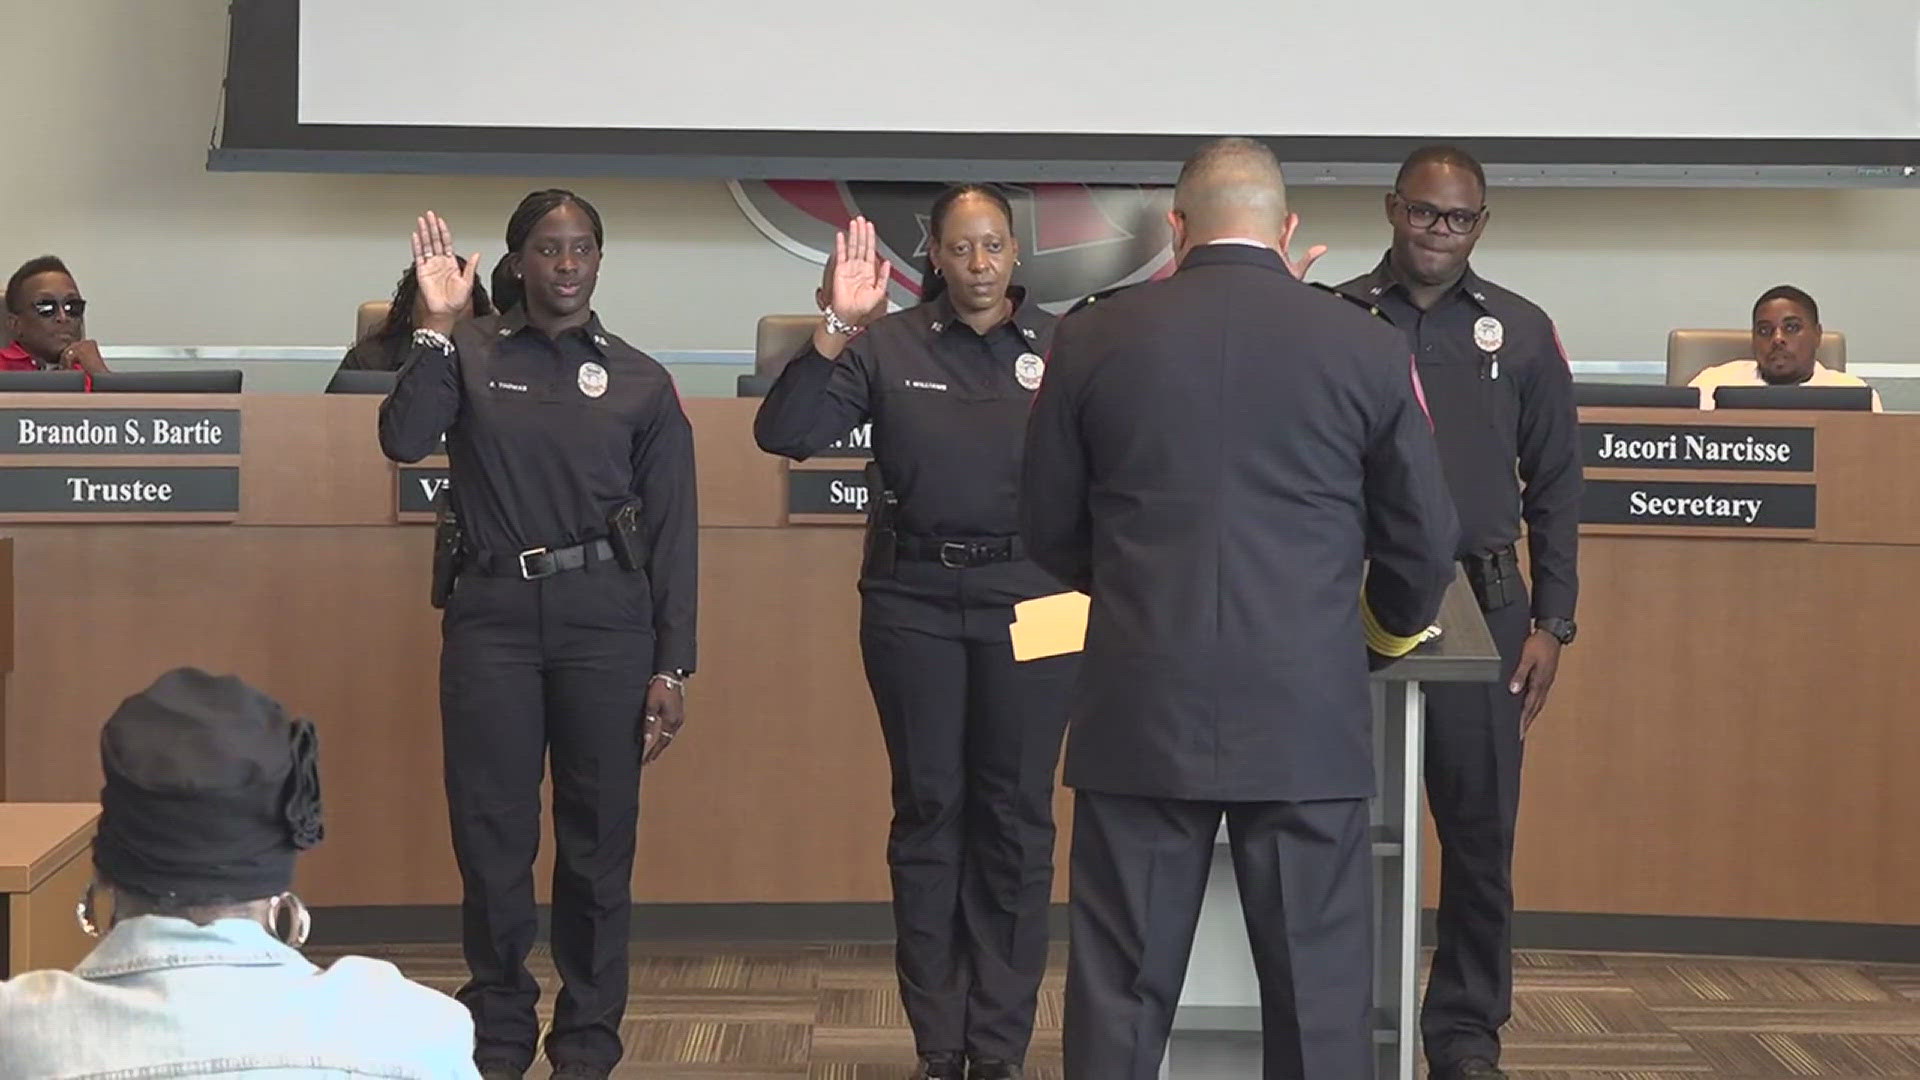 They were welcomed to the force during Thursday’s school board meeting.